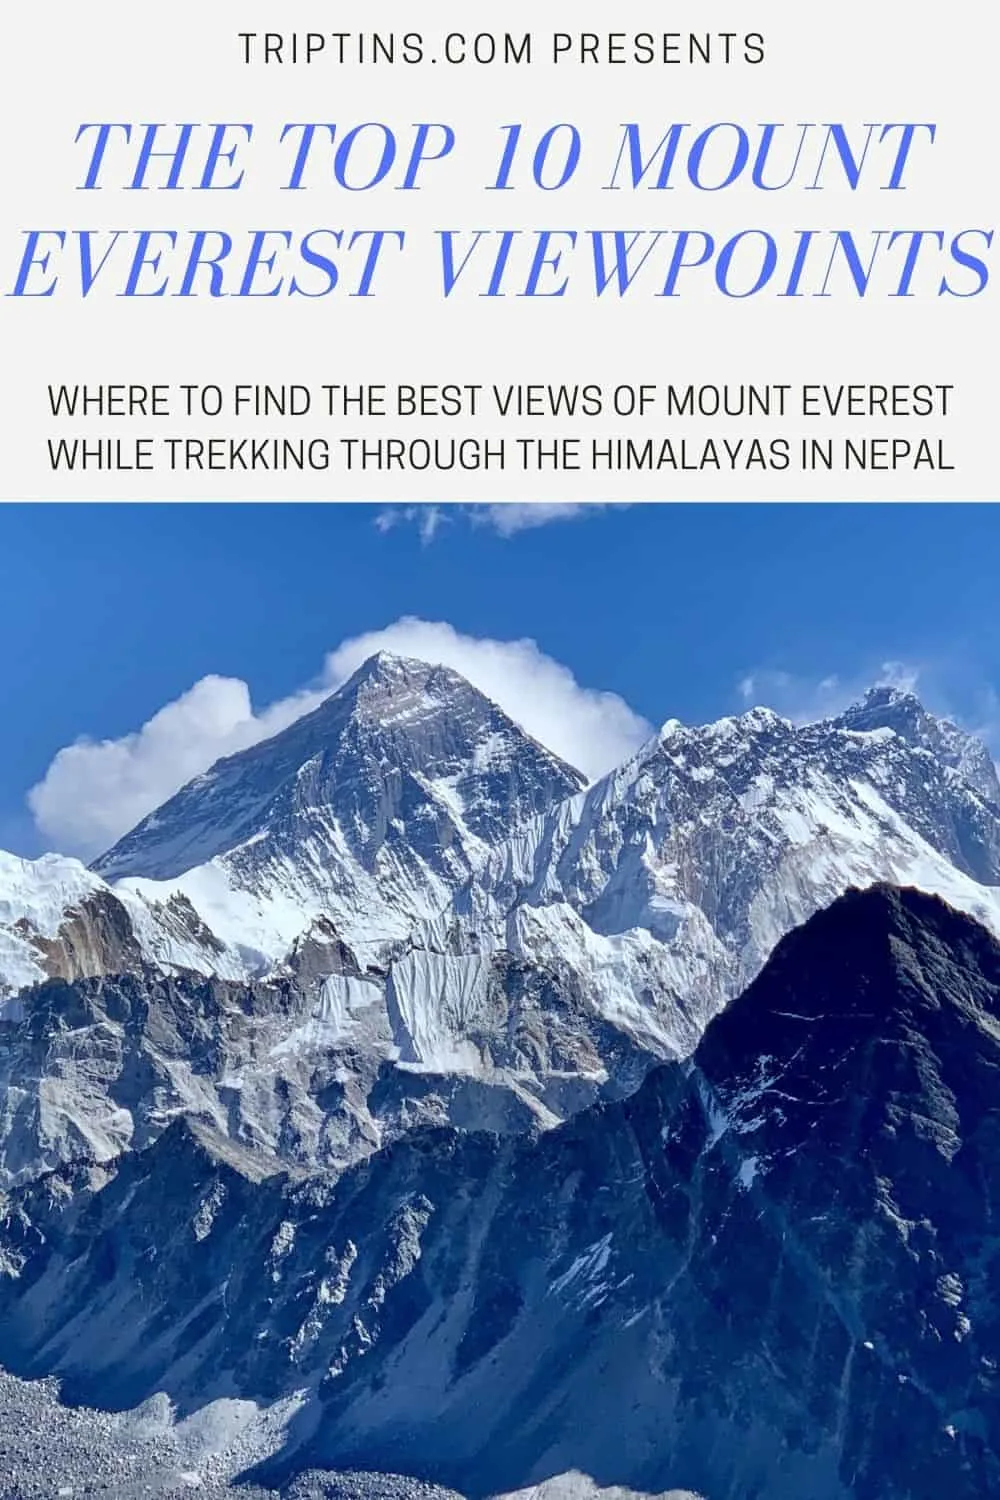 Mount Everest Viewpoints